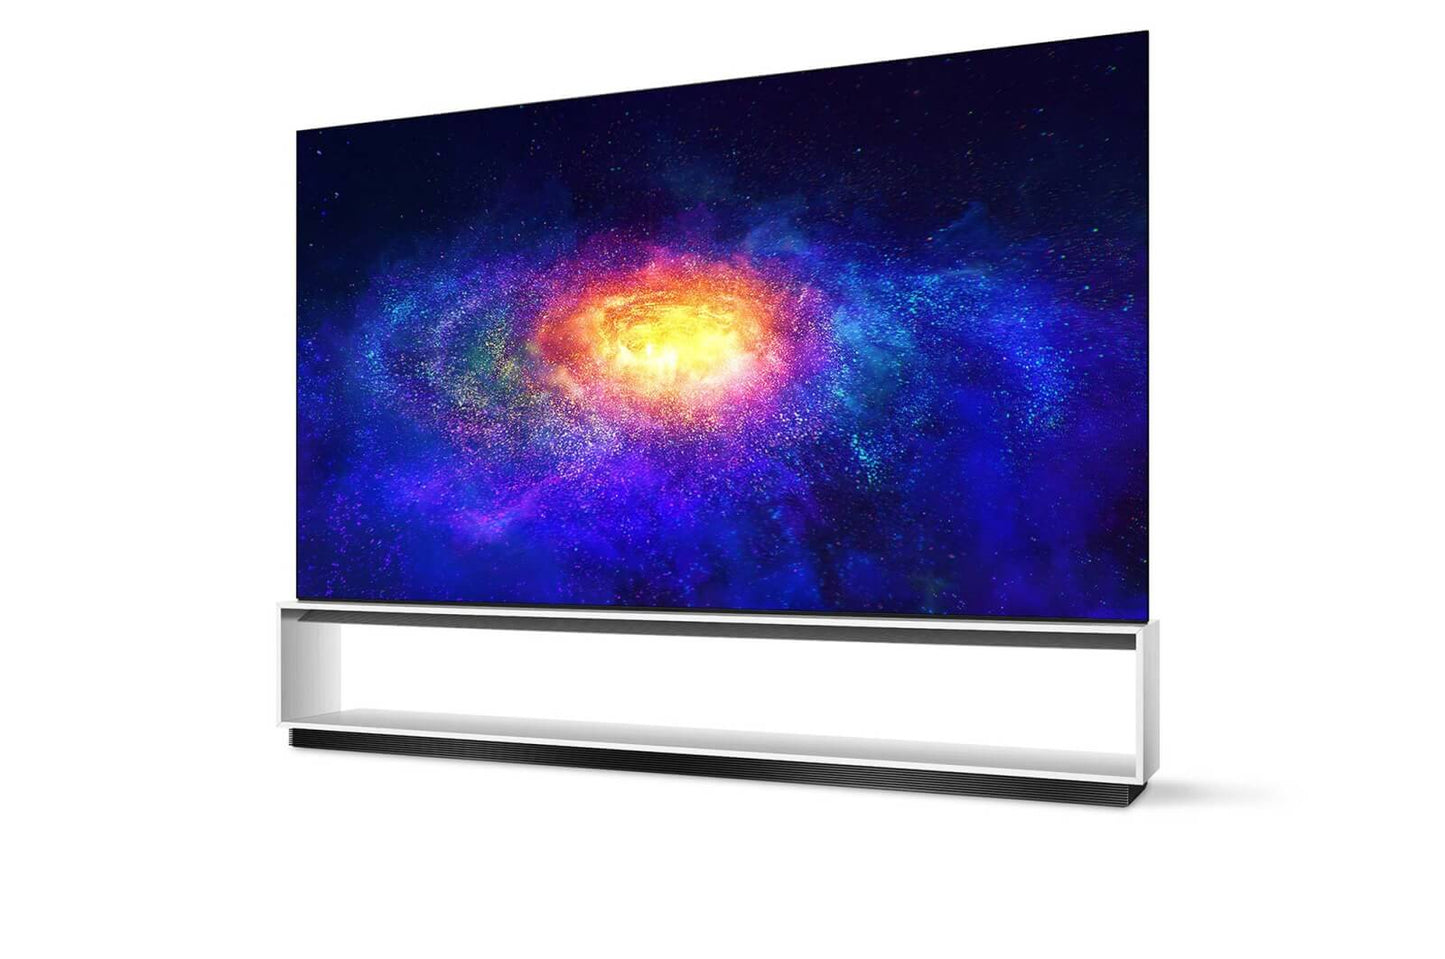 LG OLED TV 88 Inch SIGNATURE ZX Series Smart Tv - 88 ZXPVA, Gallery Design 8K TV Cinema HDR WebOS Smart AI ThinQ Pixel Dimming